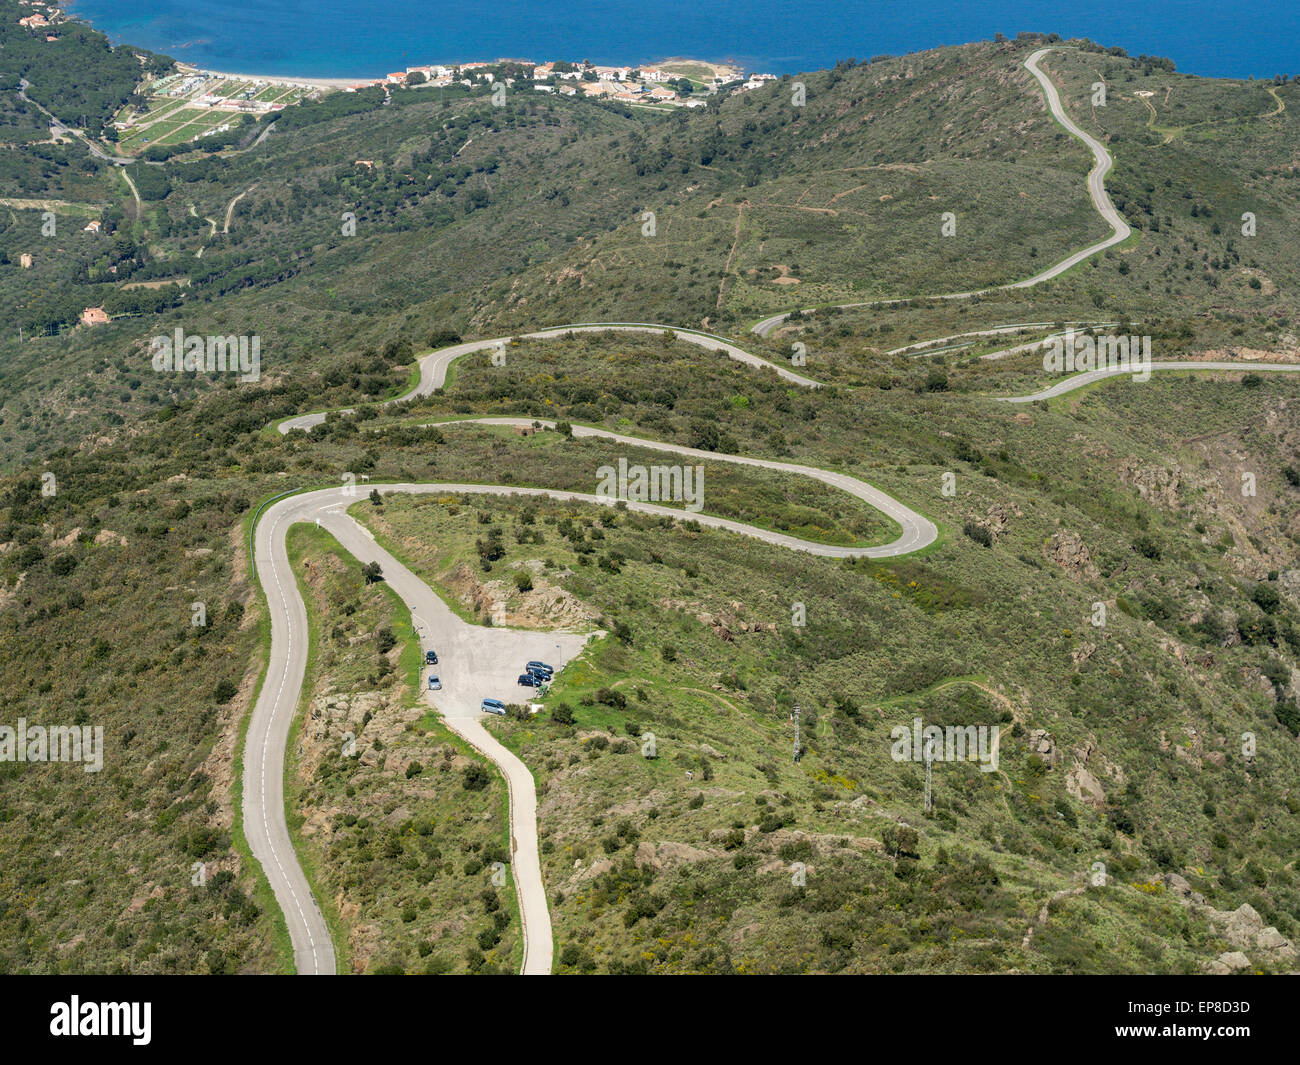 Twisting Road to Rodes. The winding road that climbs the steep hills above the blue Mediterranean Sea to the abbey parking lot Stock Photo